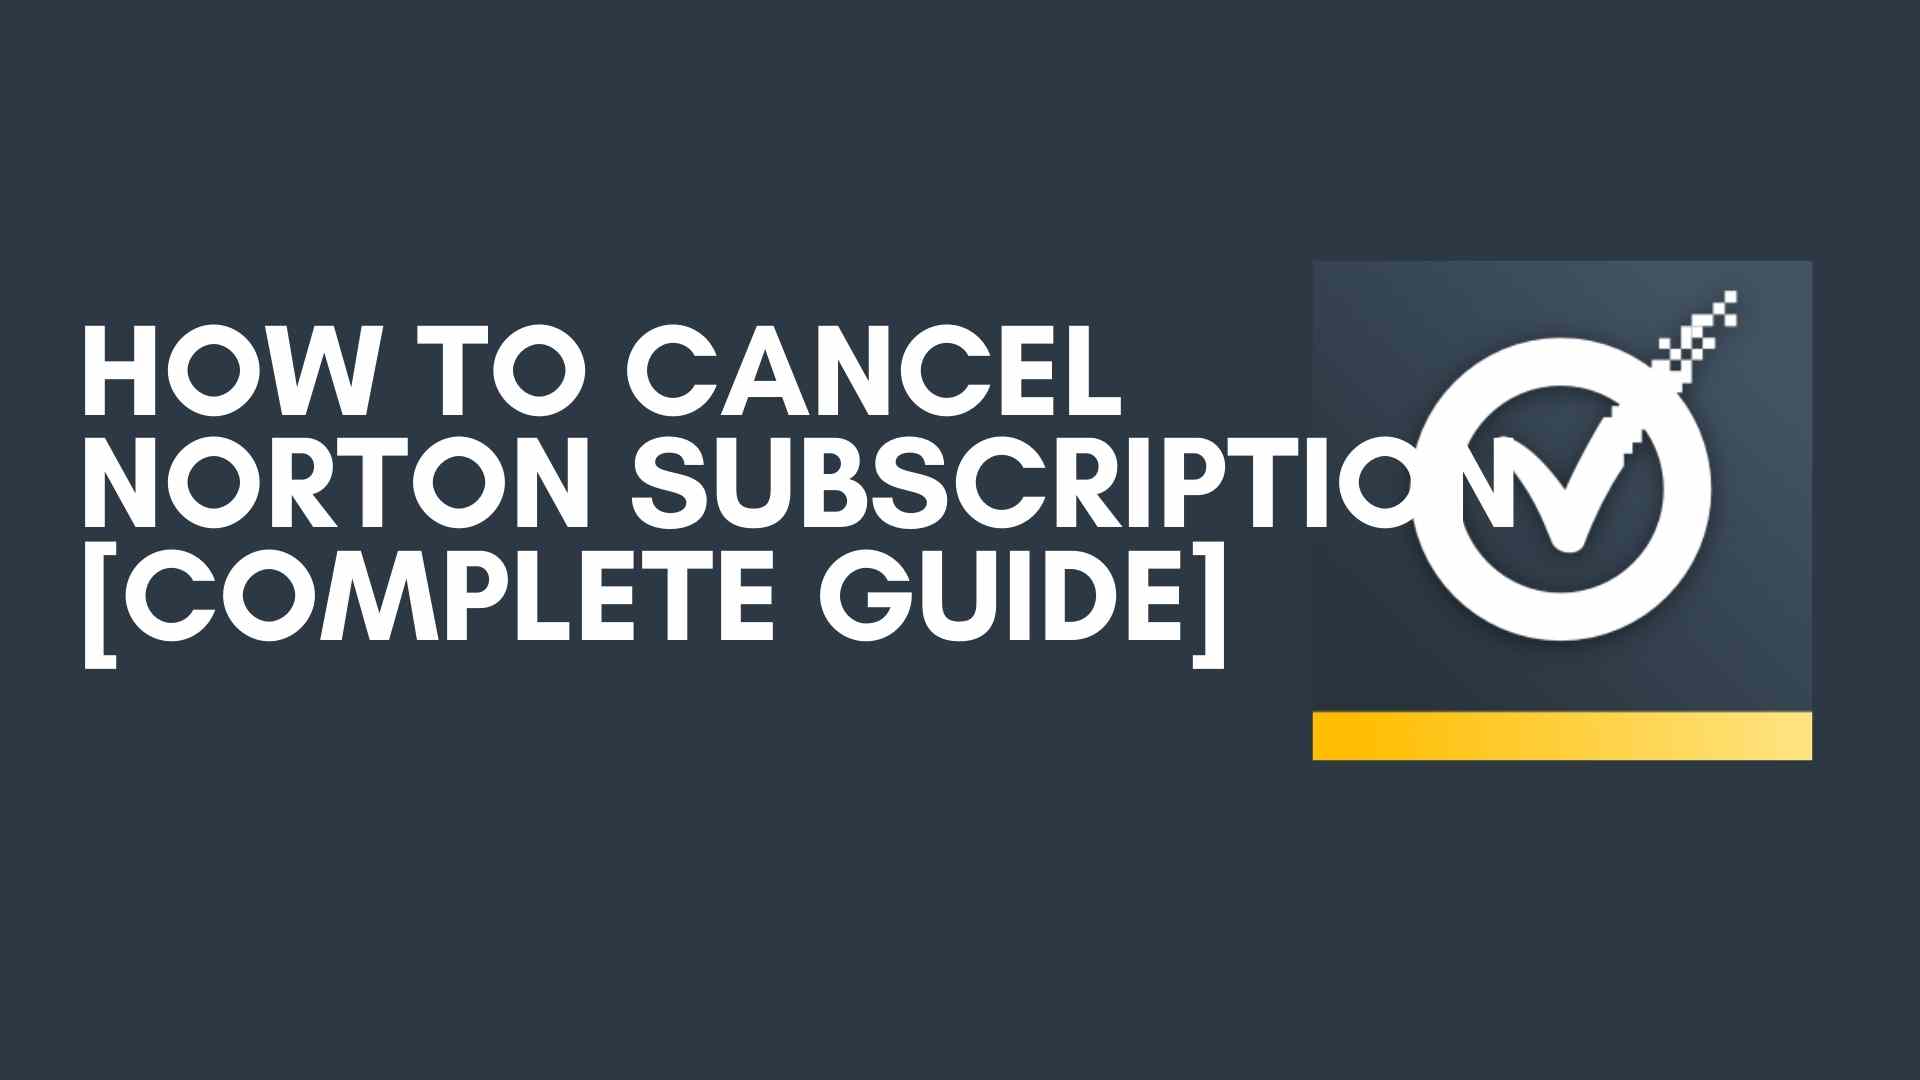 How to Cancel Norton Subscription